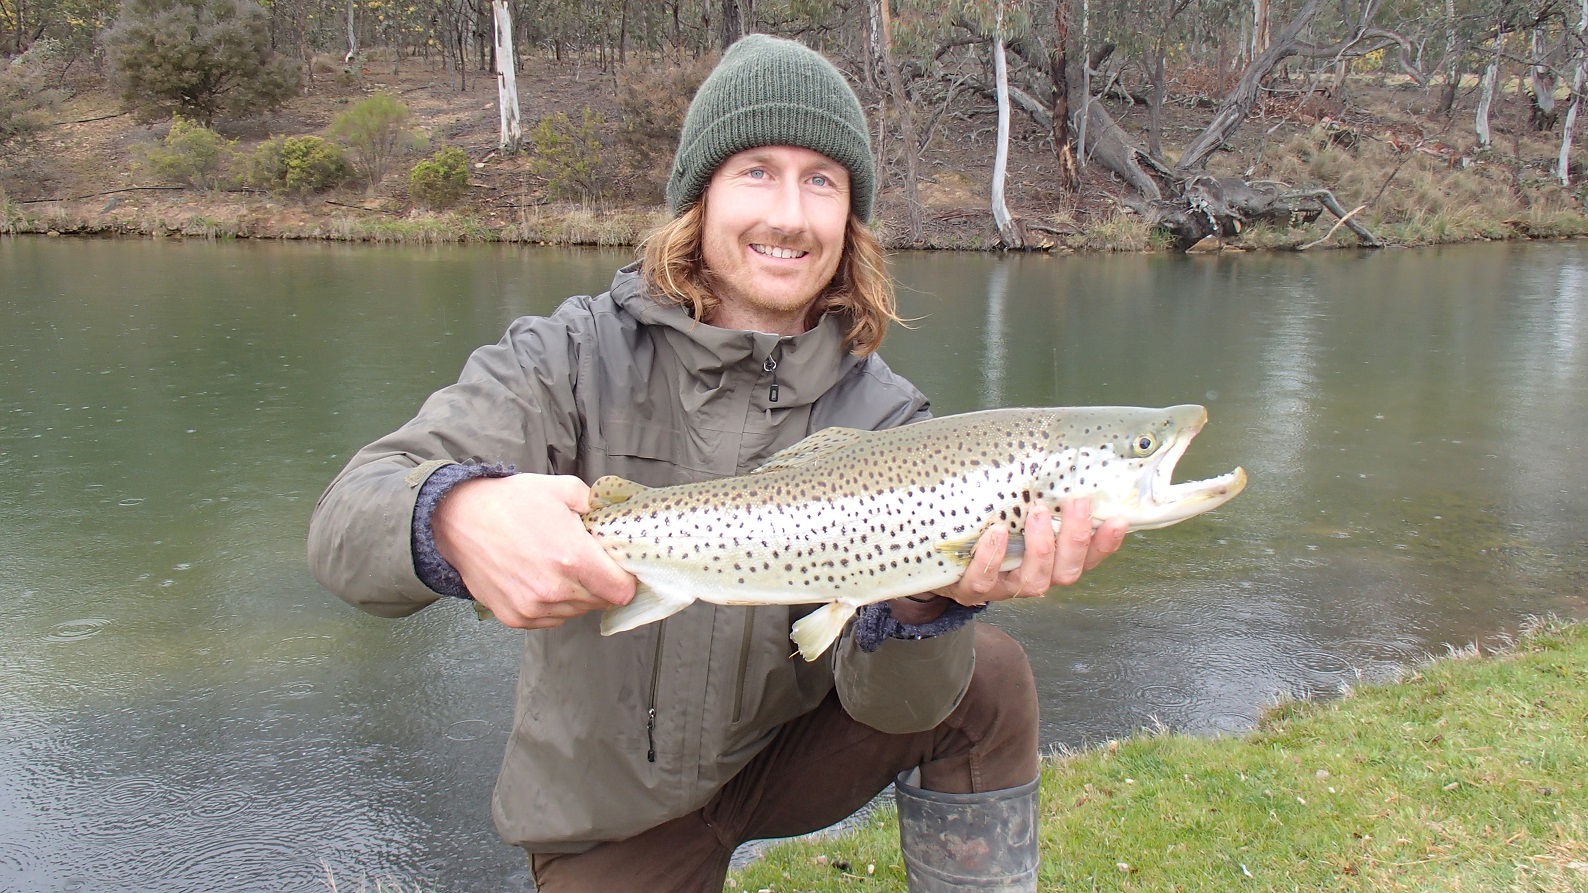 Catching big brown trout in the rain